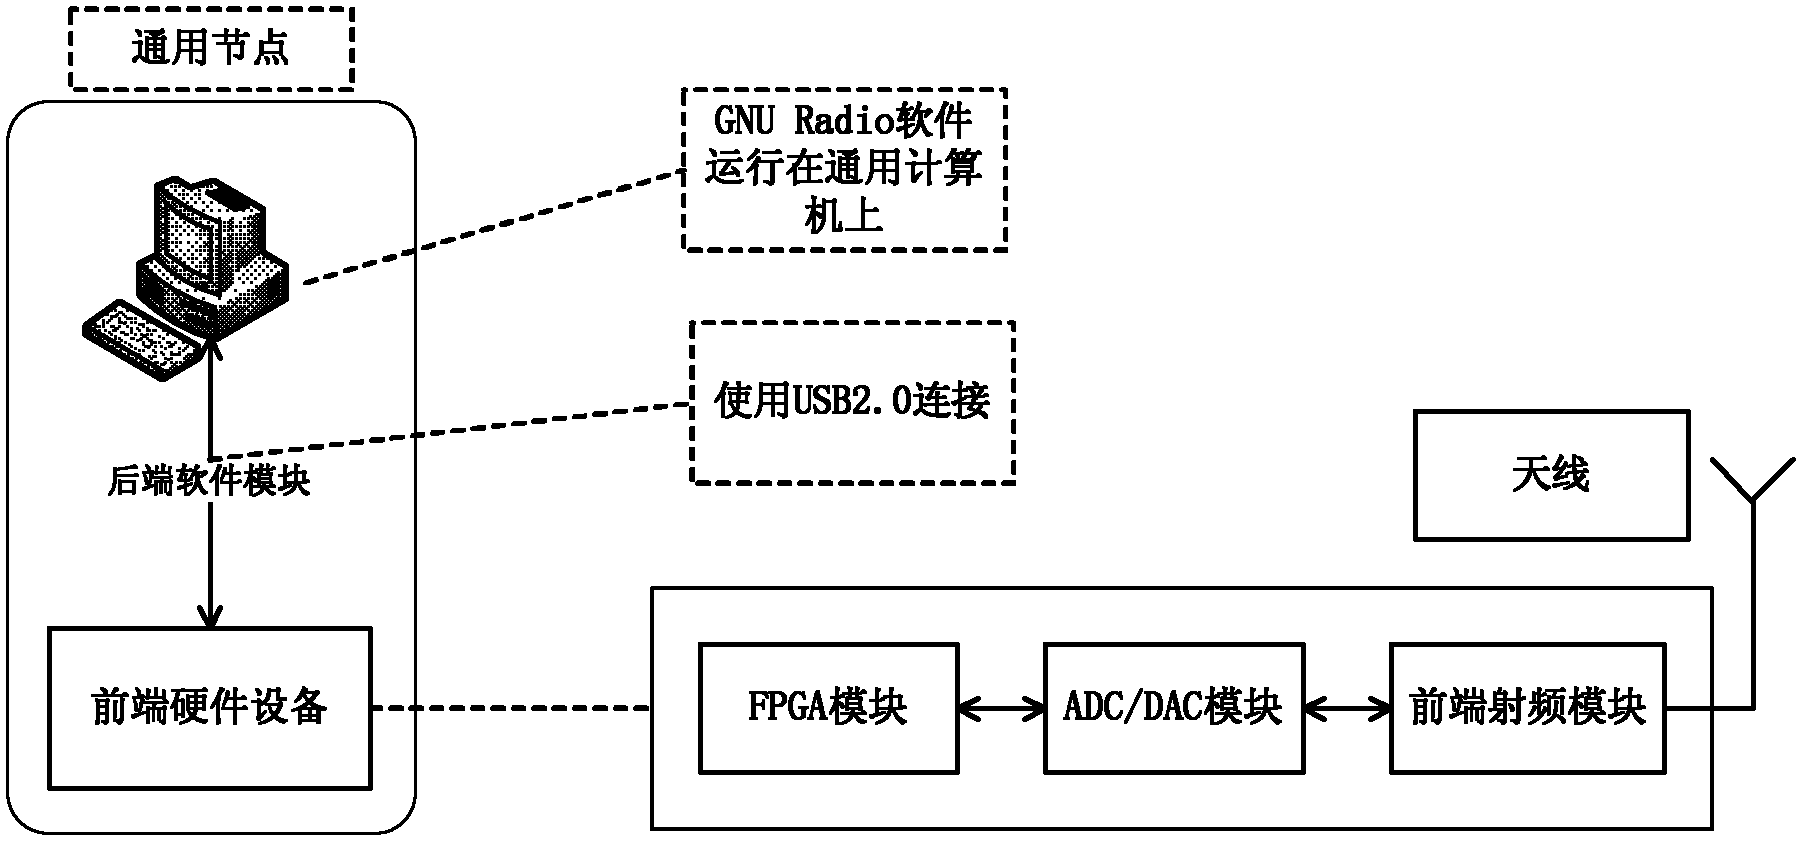 Experimental device for heterogeneous wireless network having strong bandwidth difference characteristic